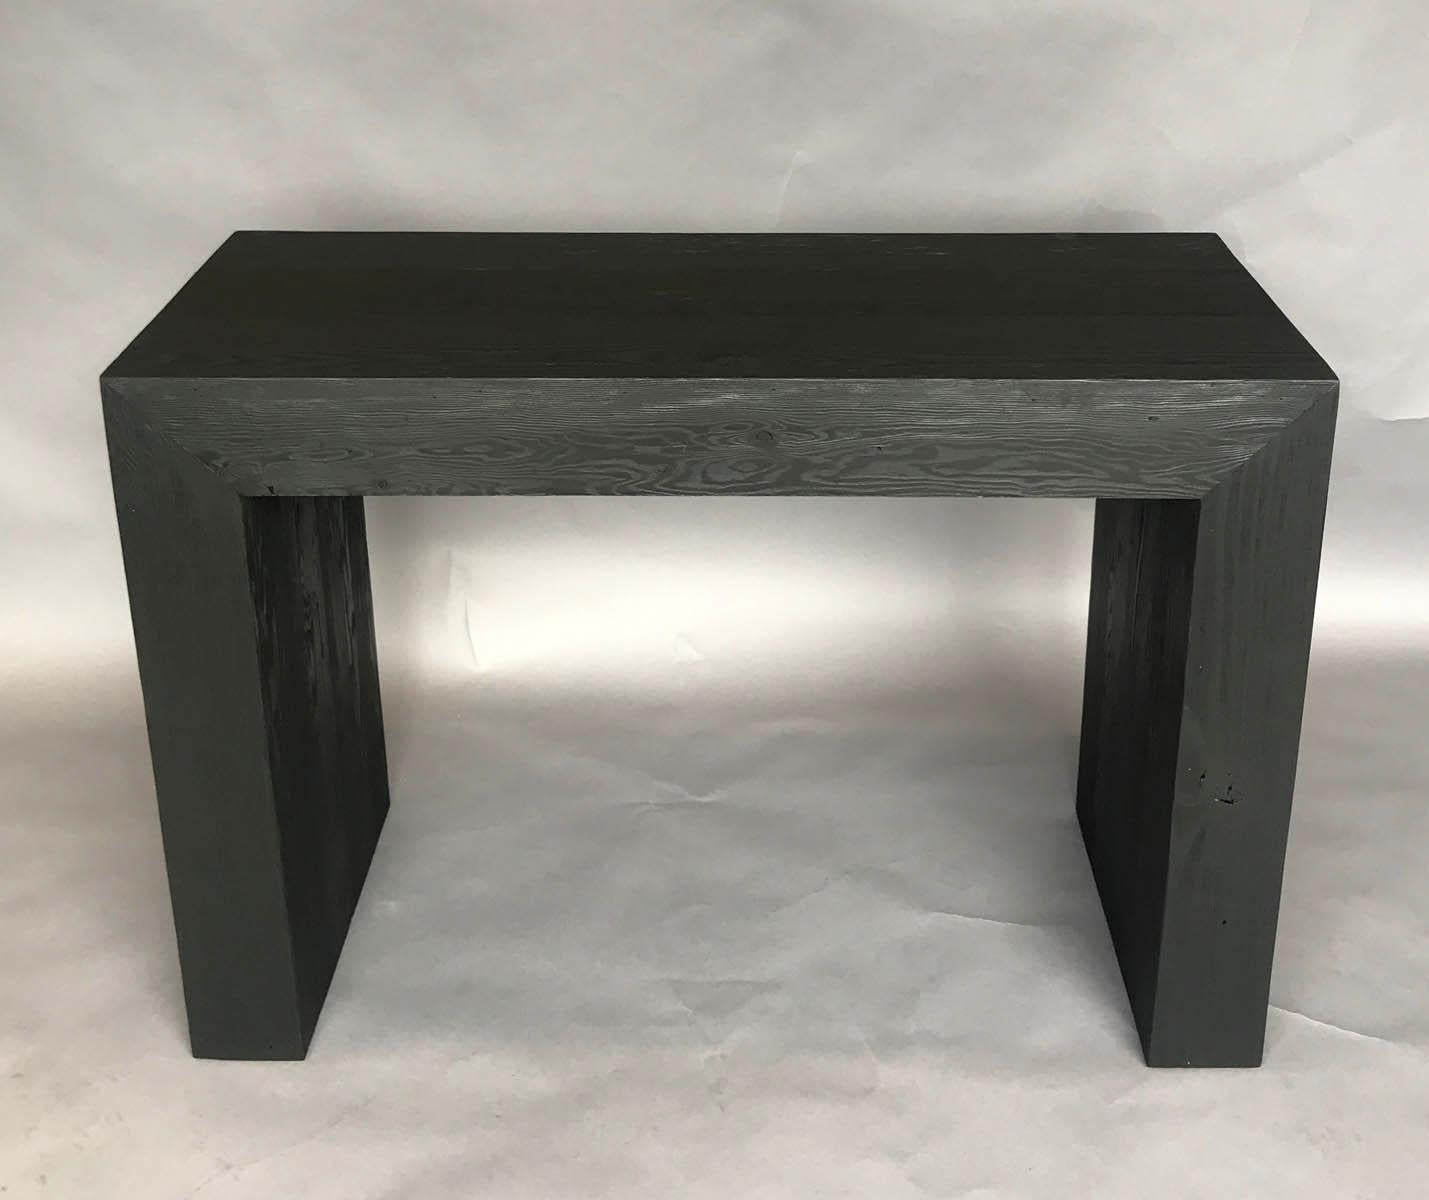 Custom Parsons console table or sofa back table in Douglas fir. Can be made in any size and in a variety of finishes, see close up photos. Can also be made in Walnut or Oak for a less rustic look. Made by Dos Gallos Studio in Los Angeles. As shown